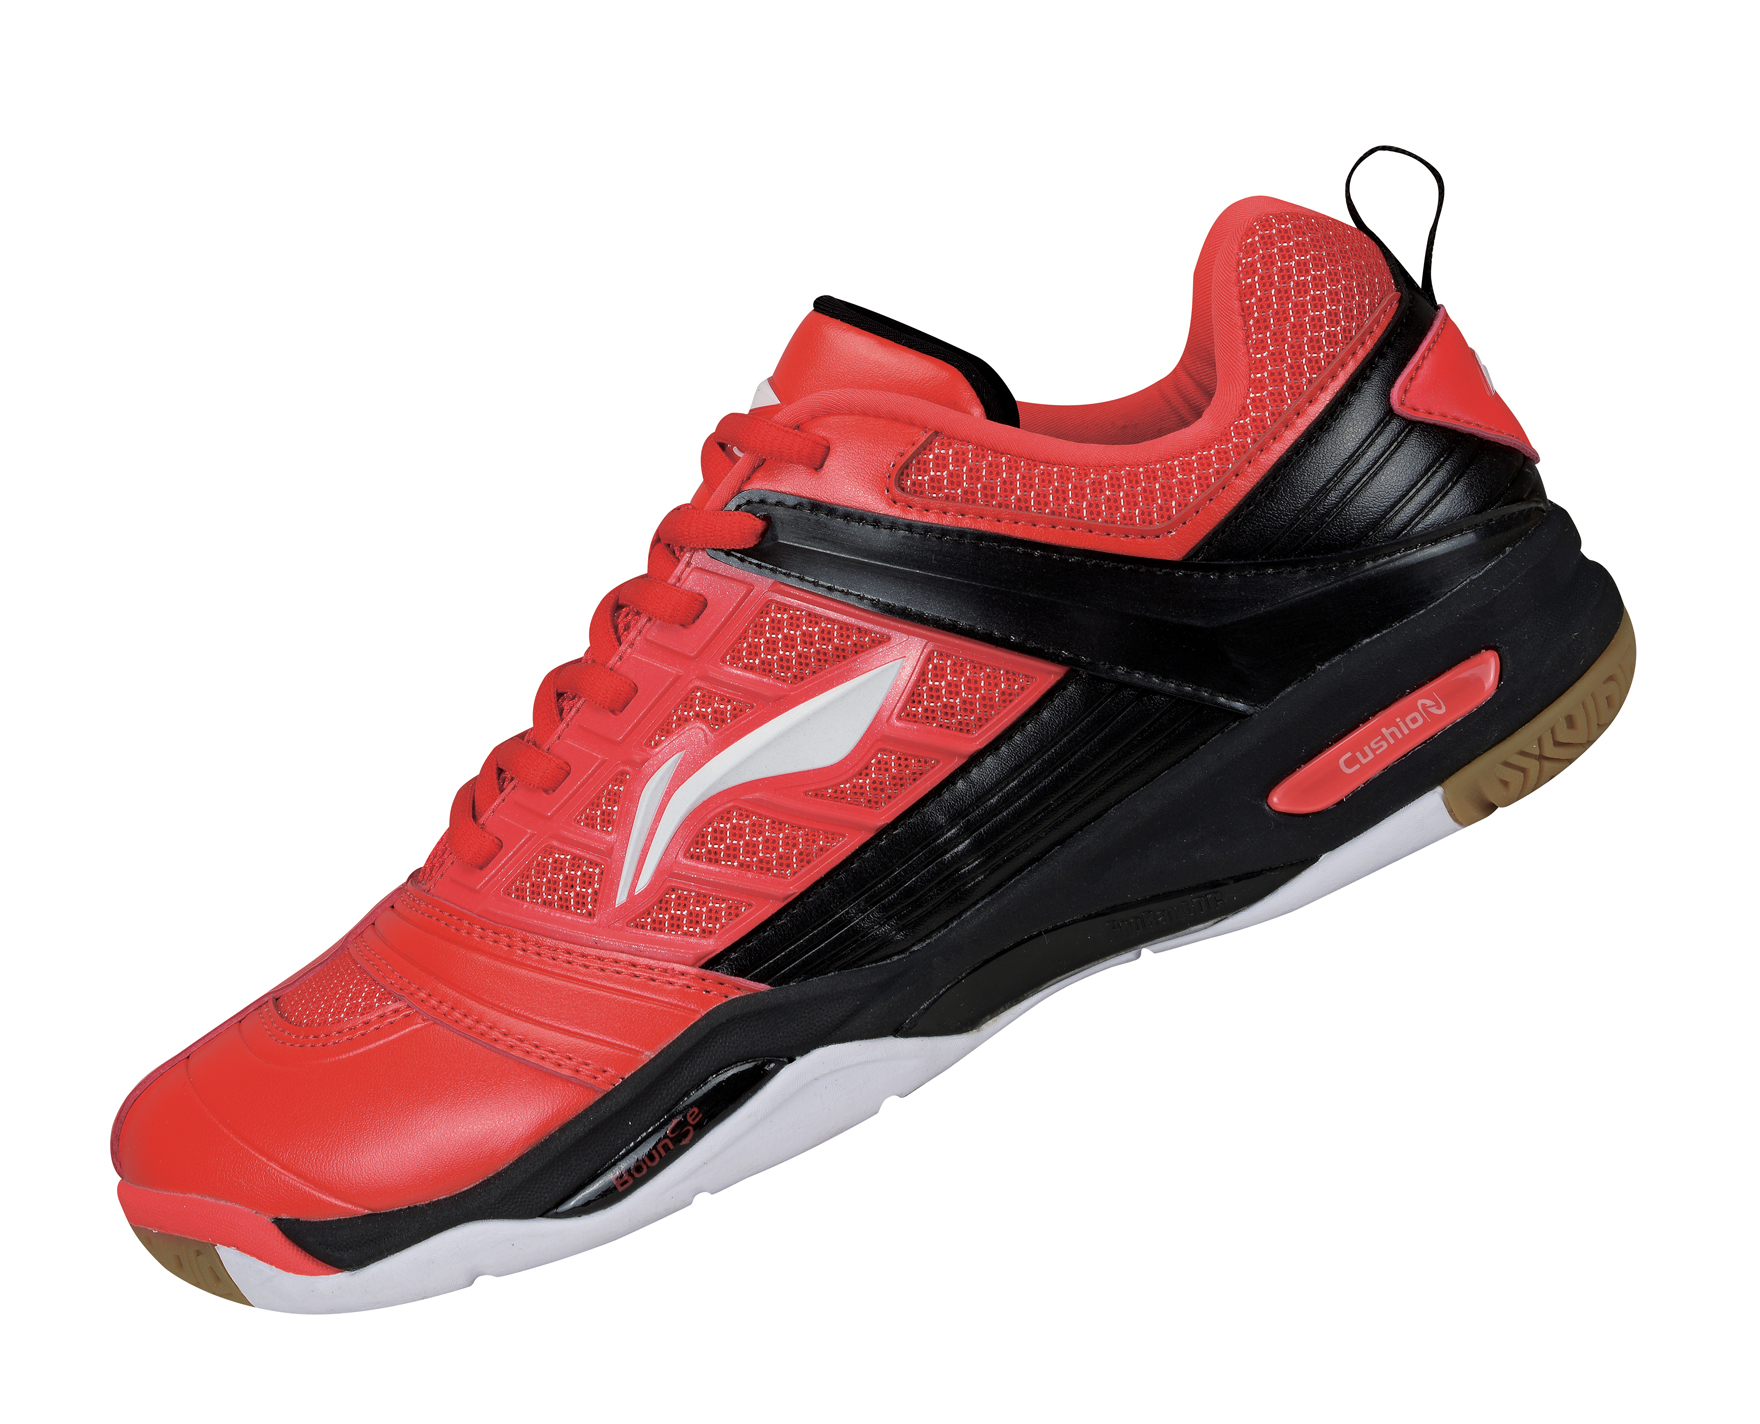 Shop Lining Badminton Shoes 2019 UP TO 59% OFF